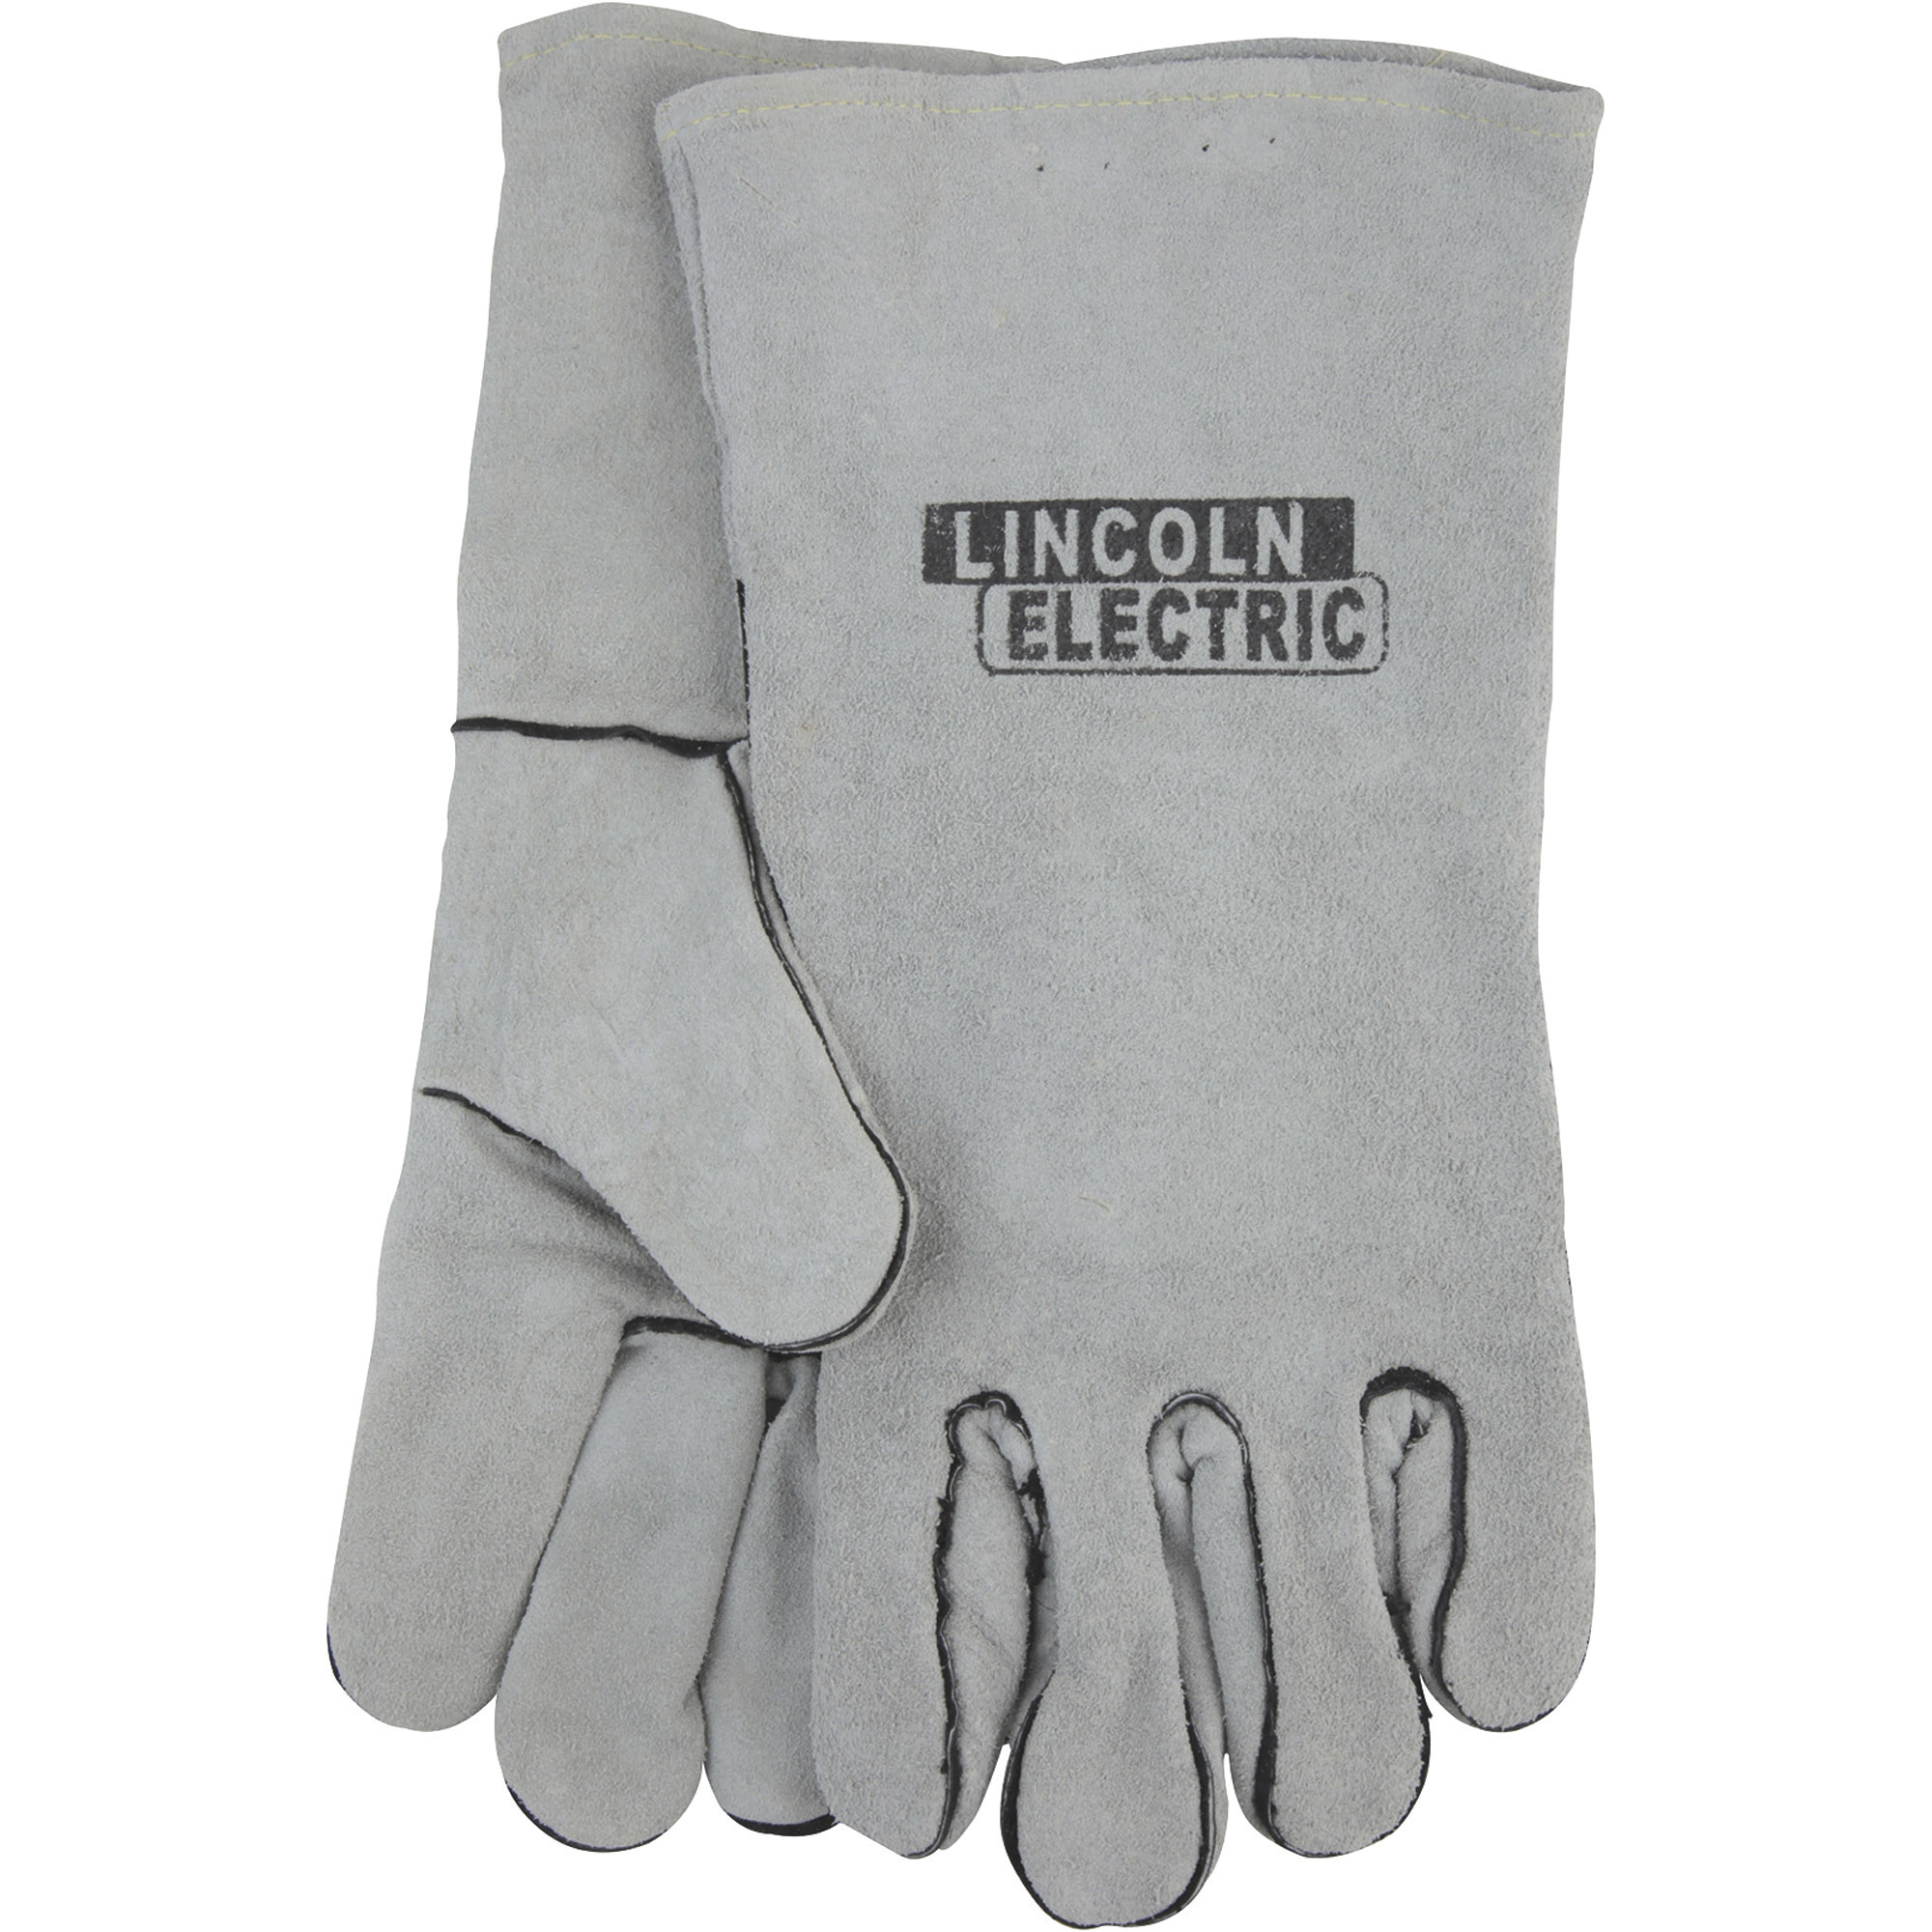 Lincoln Electric Cloth-Lined Leather Welding Gloves, Gray, One Size Fits Most, Model KH641